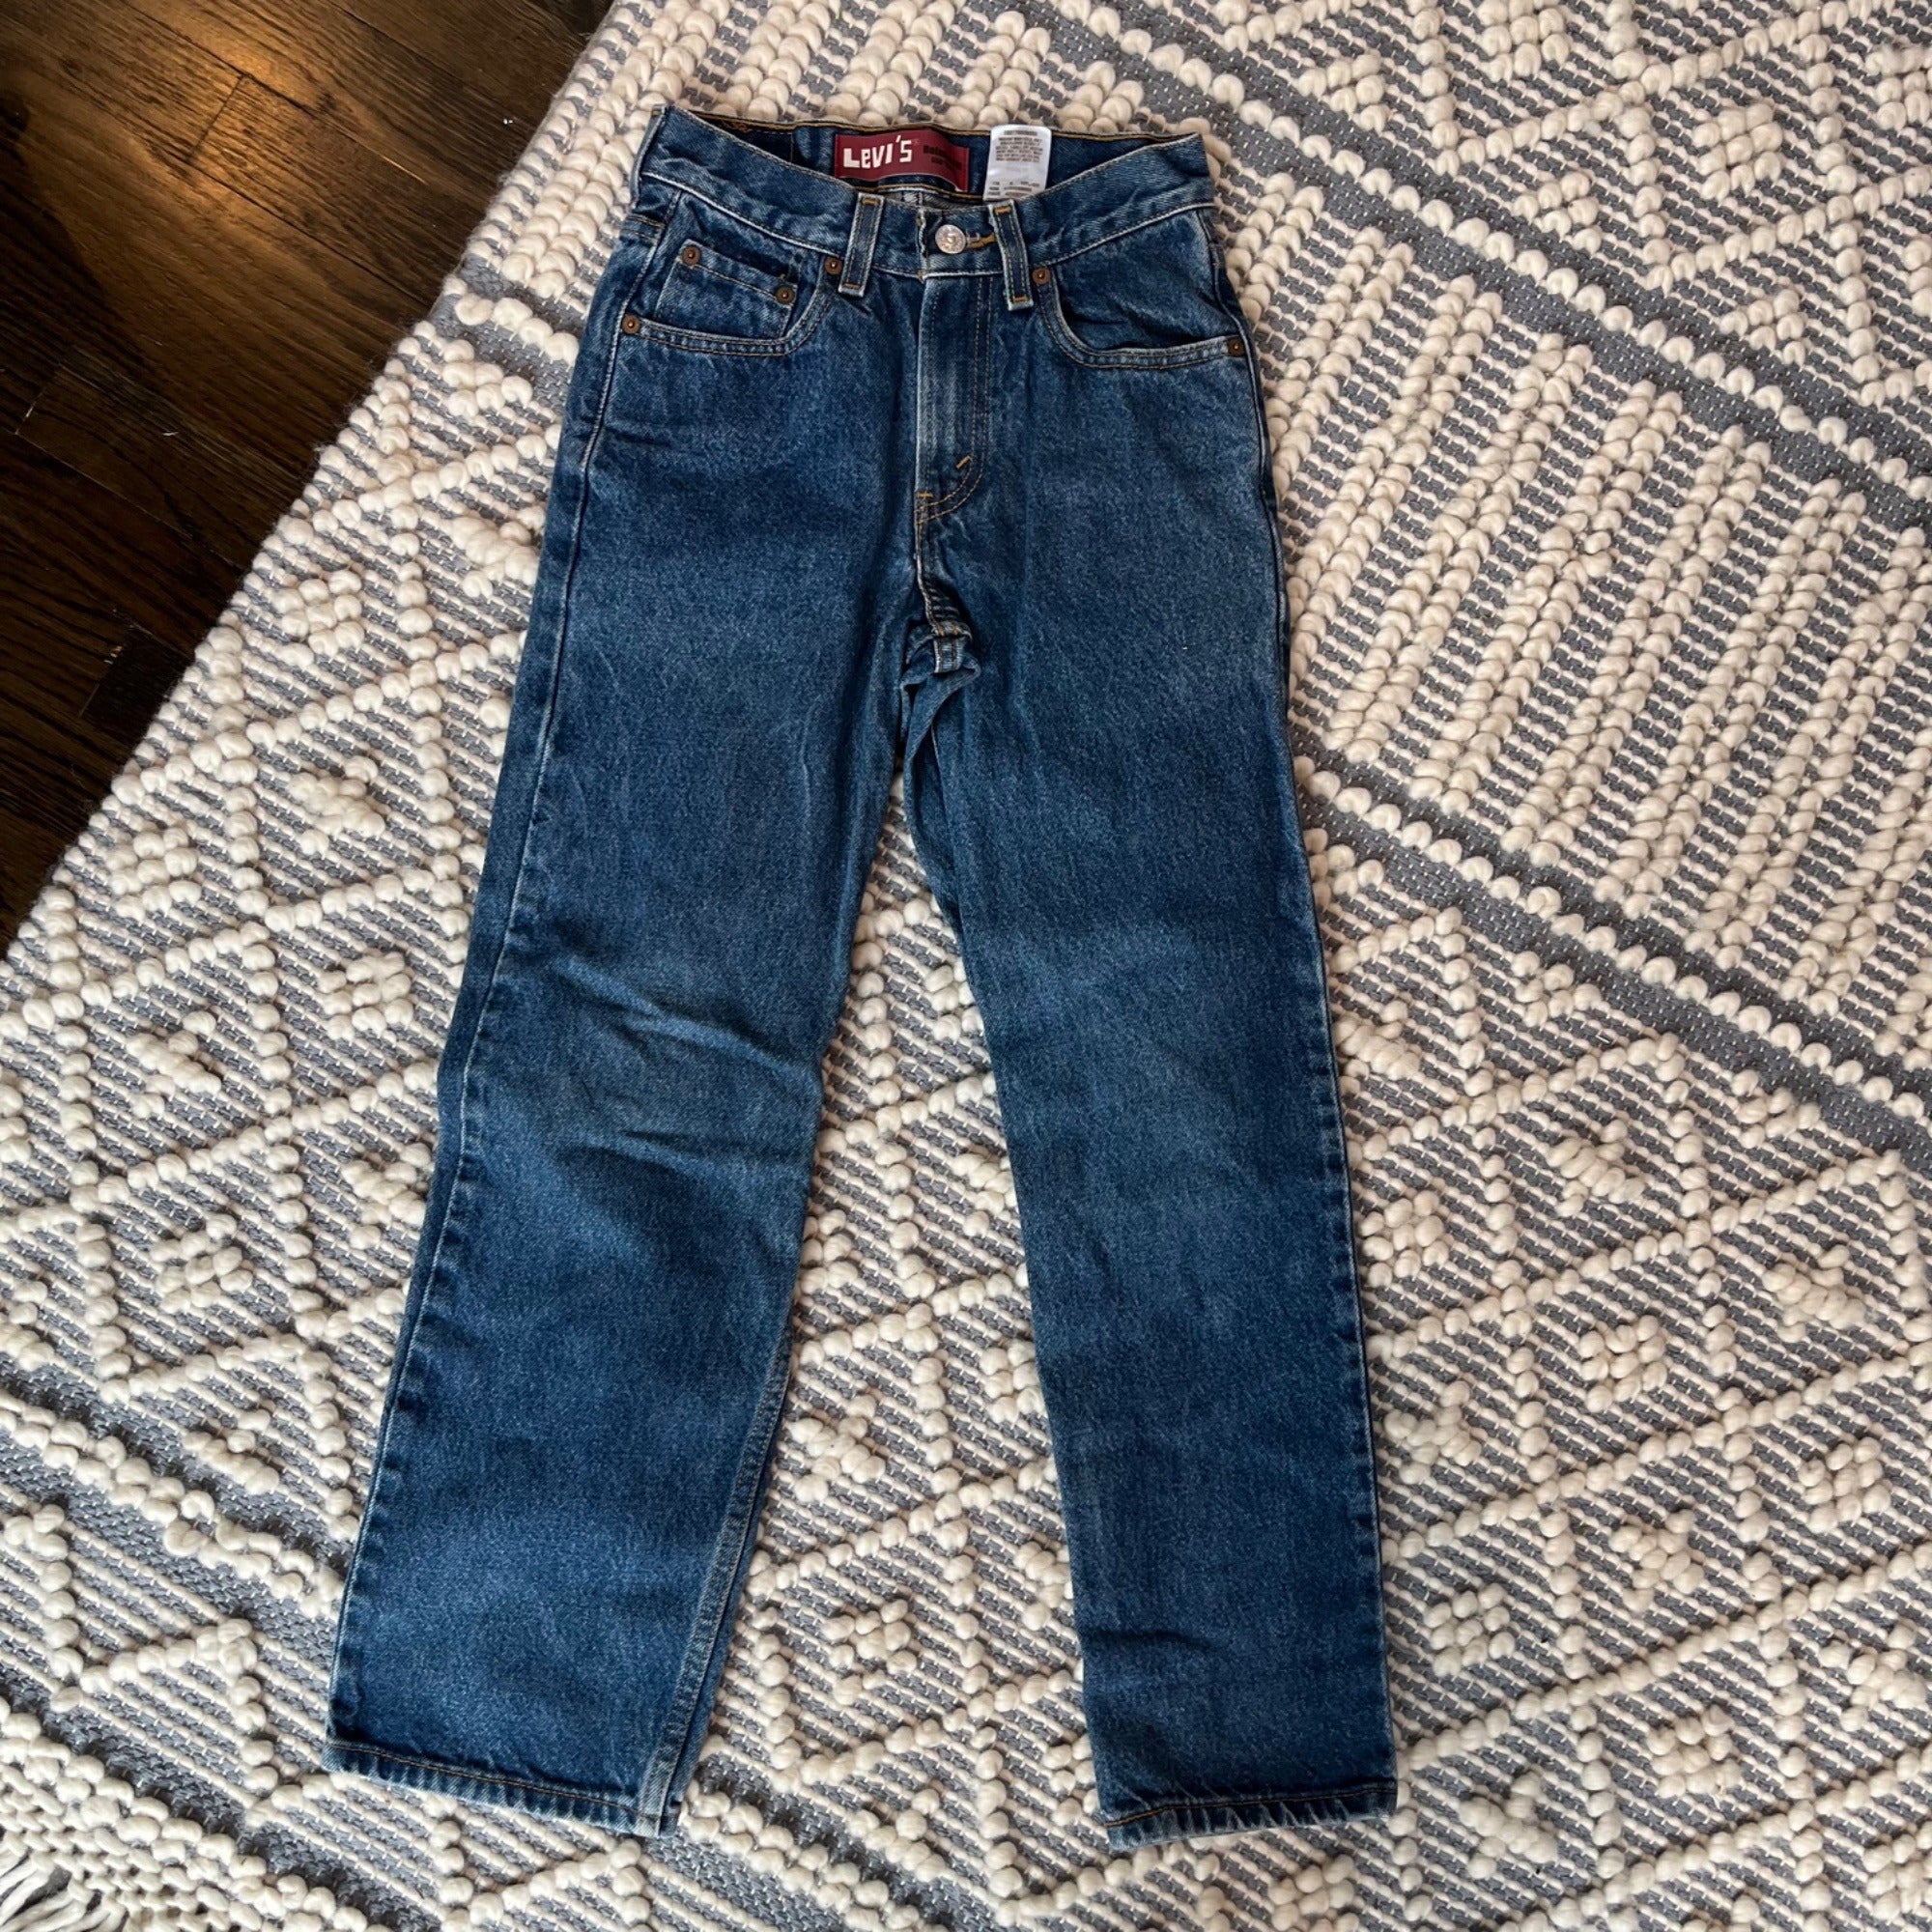 Vintage Levi's 550 Relaxed Fit Jeans 12